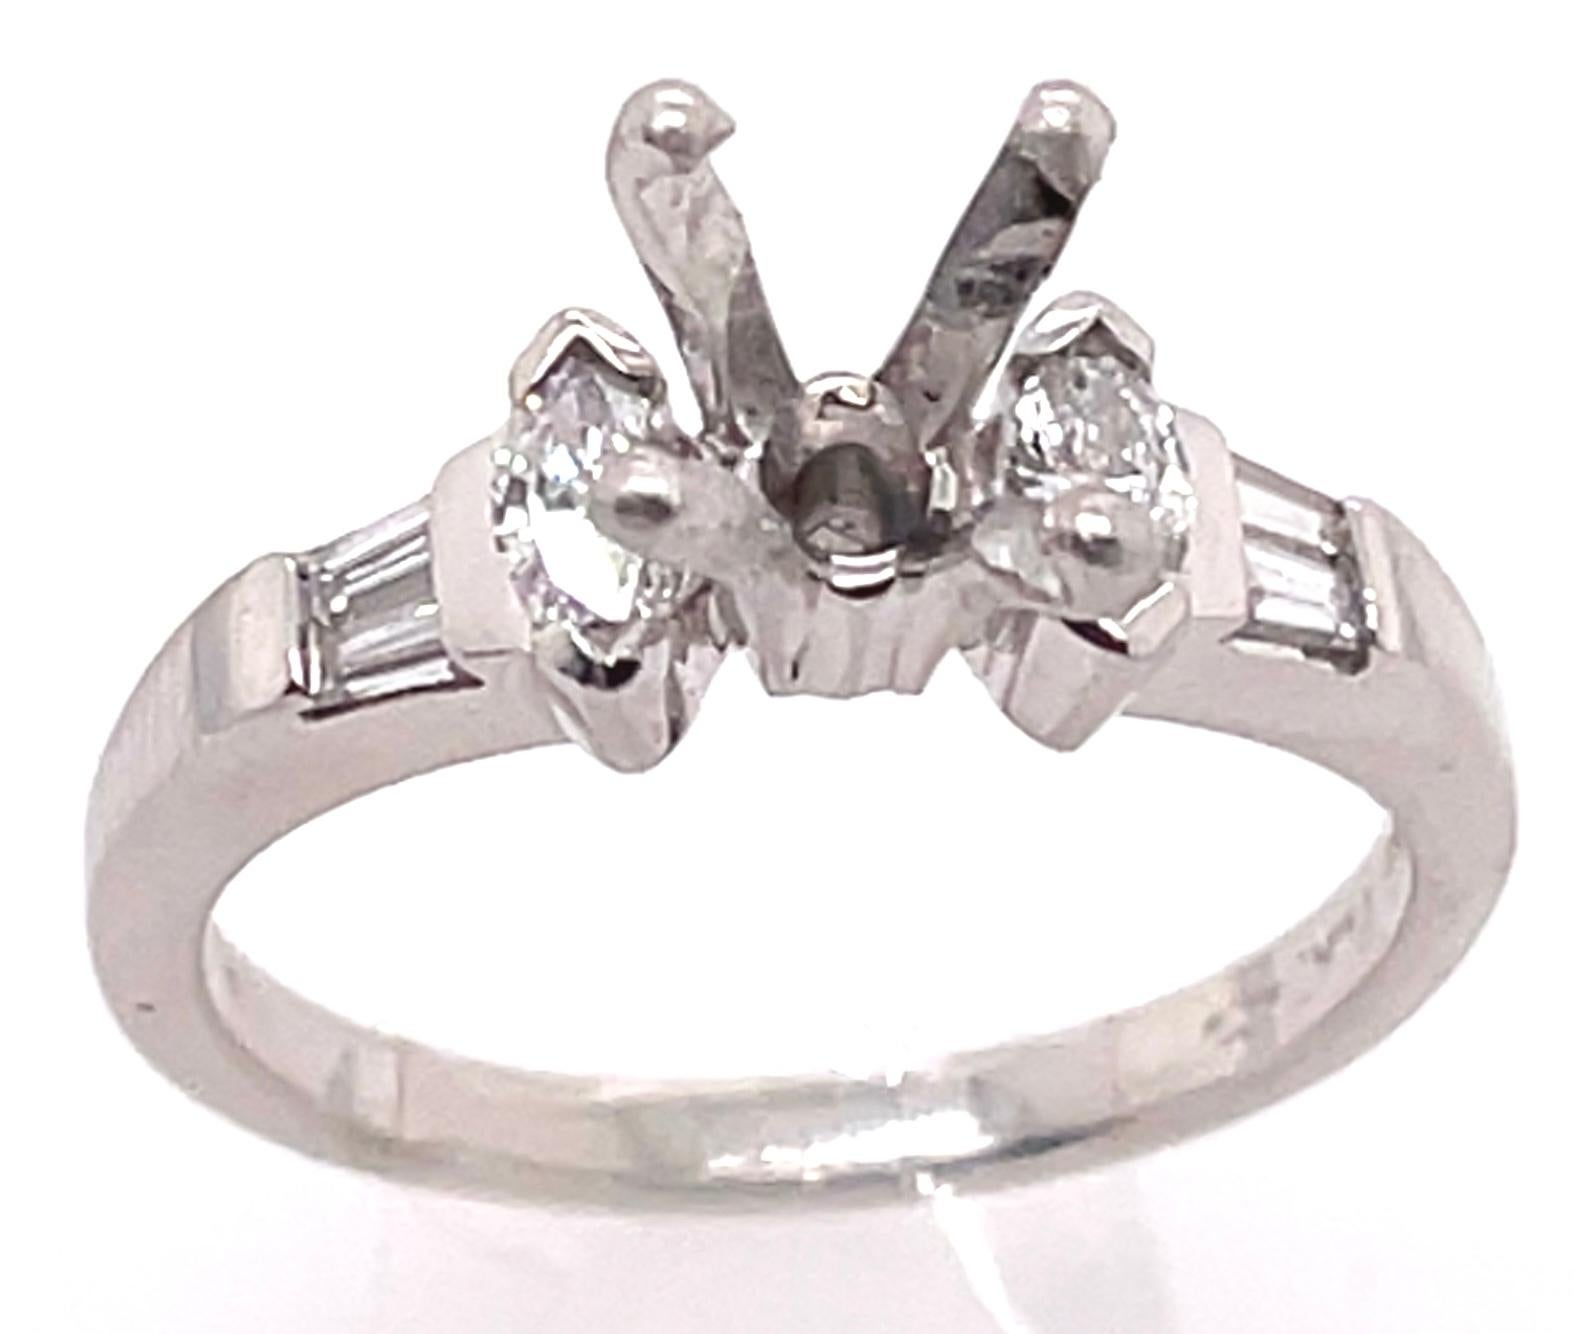 Diamond Oval And Baguette Side Detail Engagement Ring Setting In Platinum
1.00 total diamond weight.
Size 7
7 grams total weight.